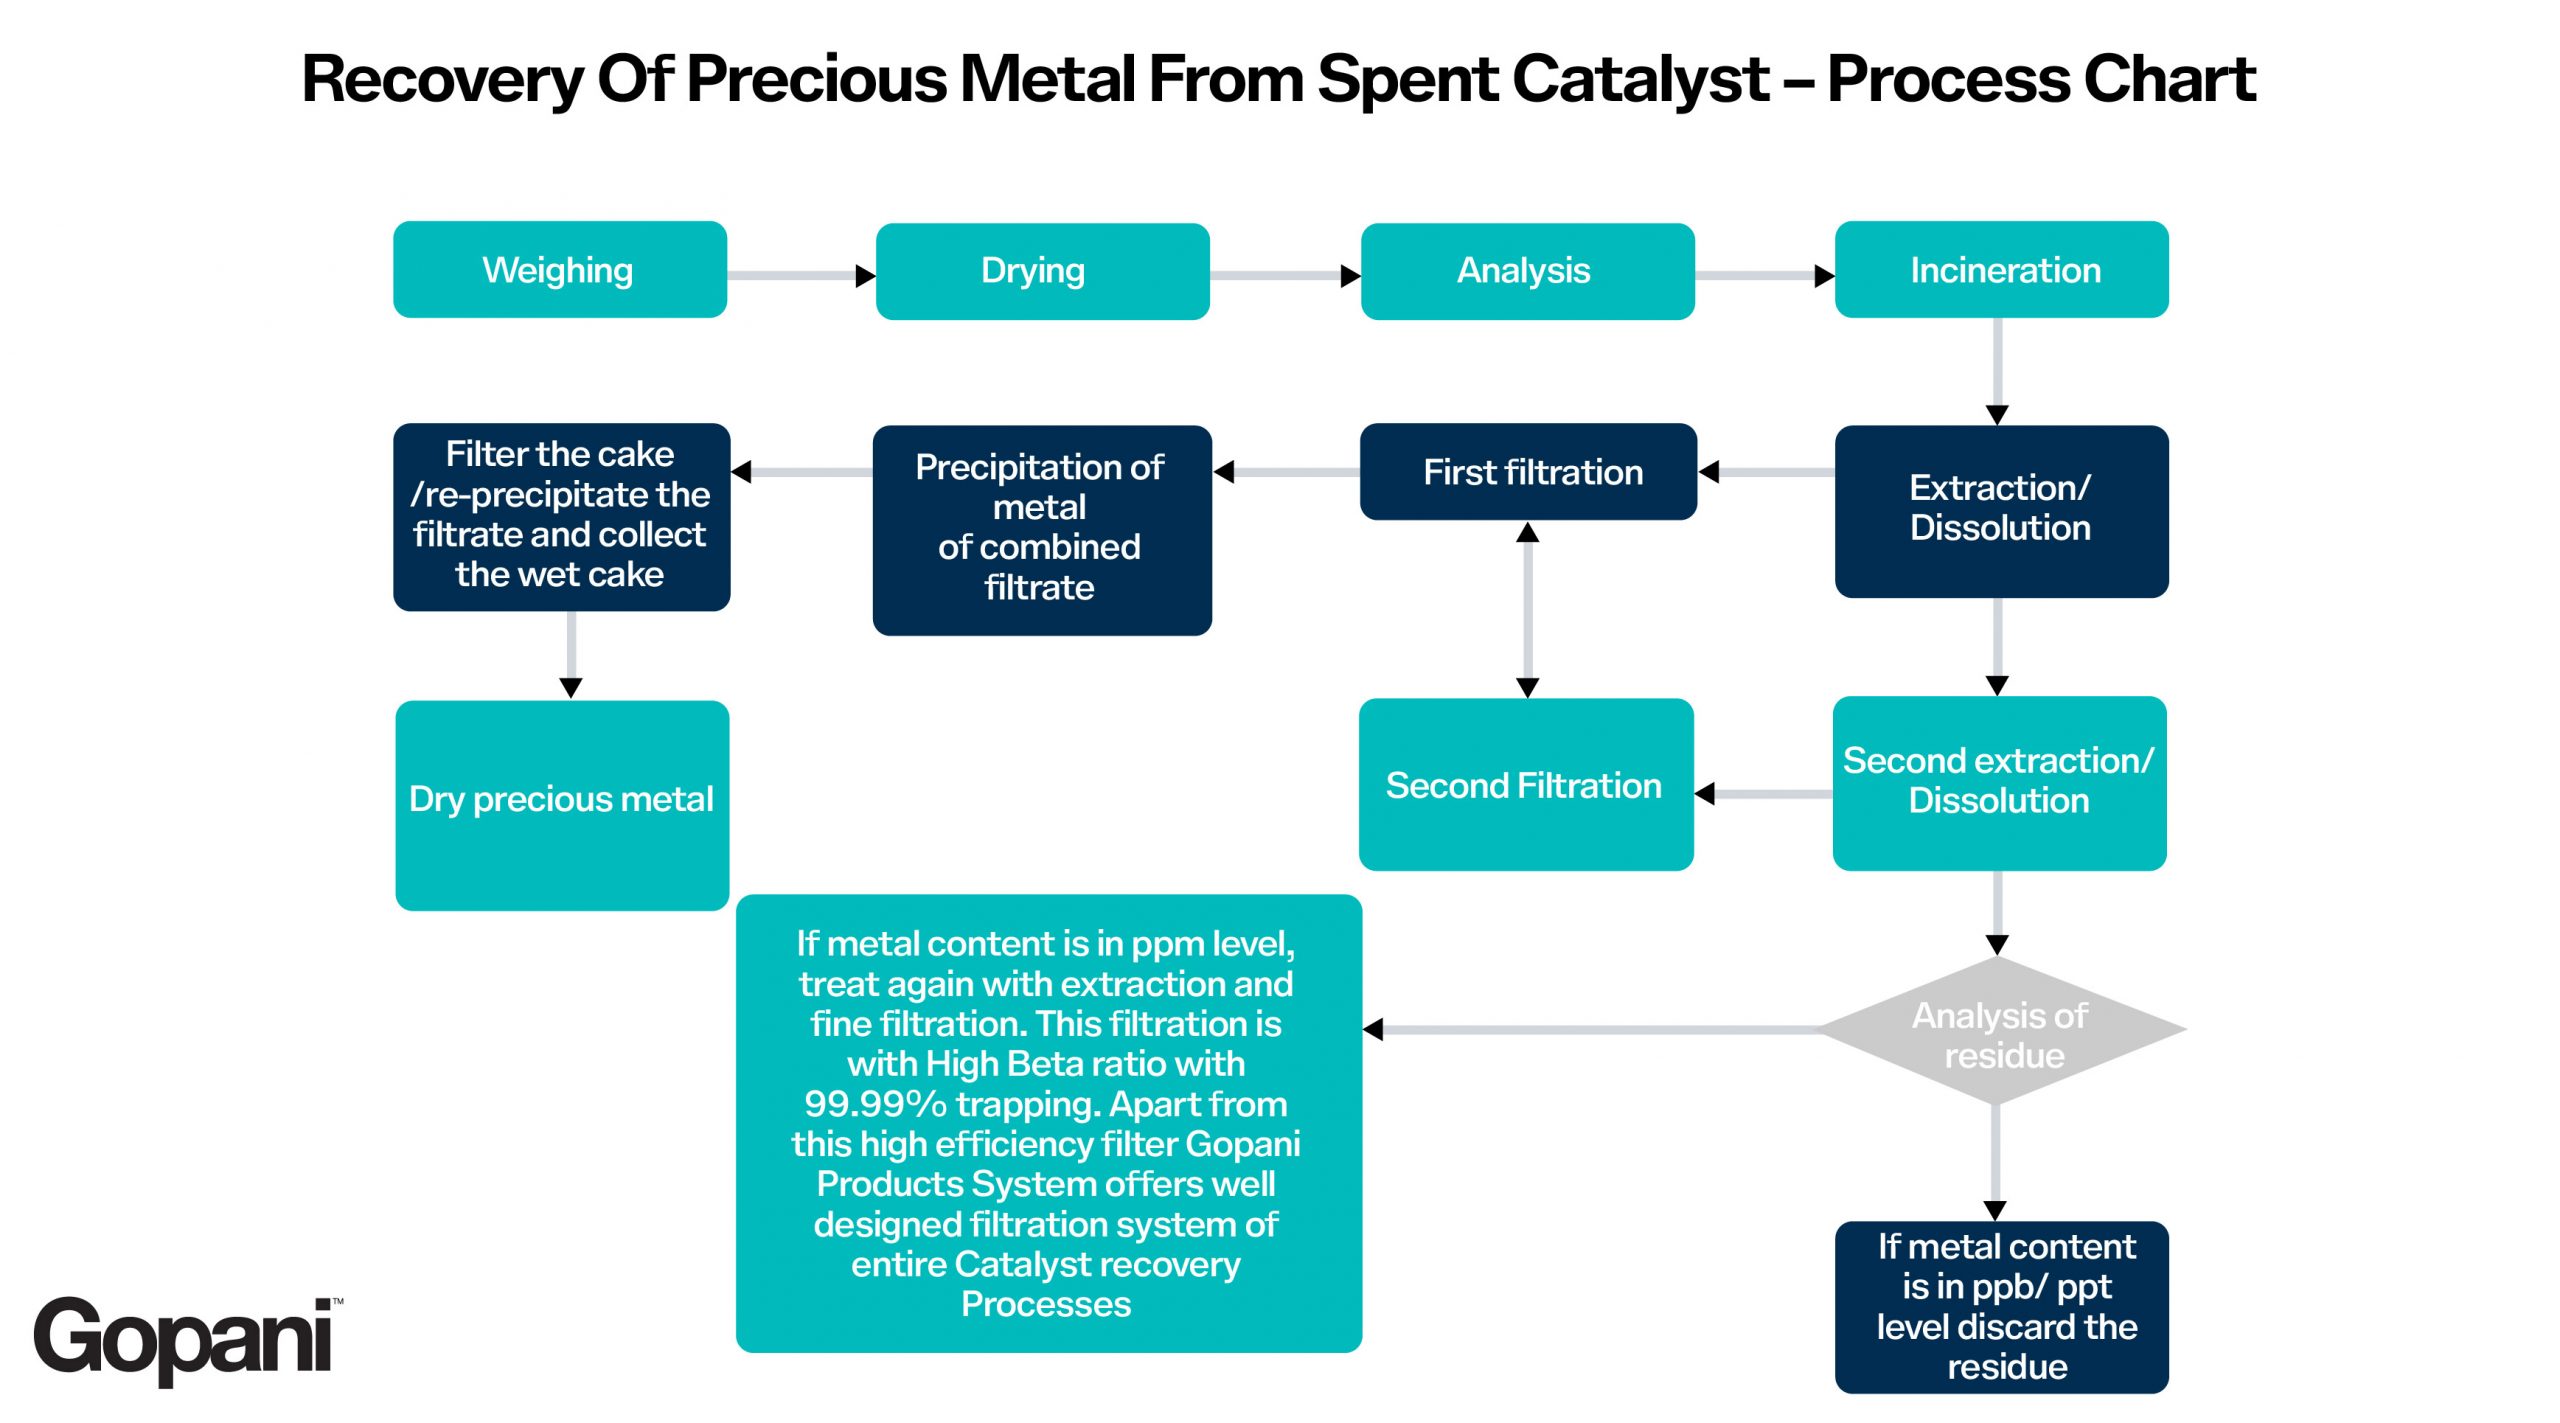 Precious metals are recovered from the spent catalyst